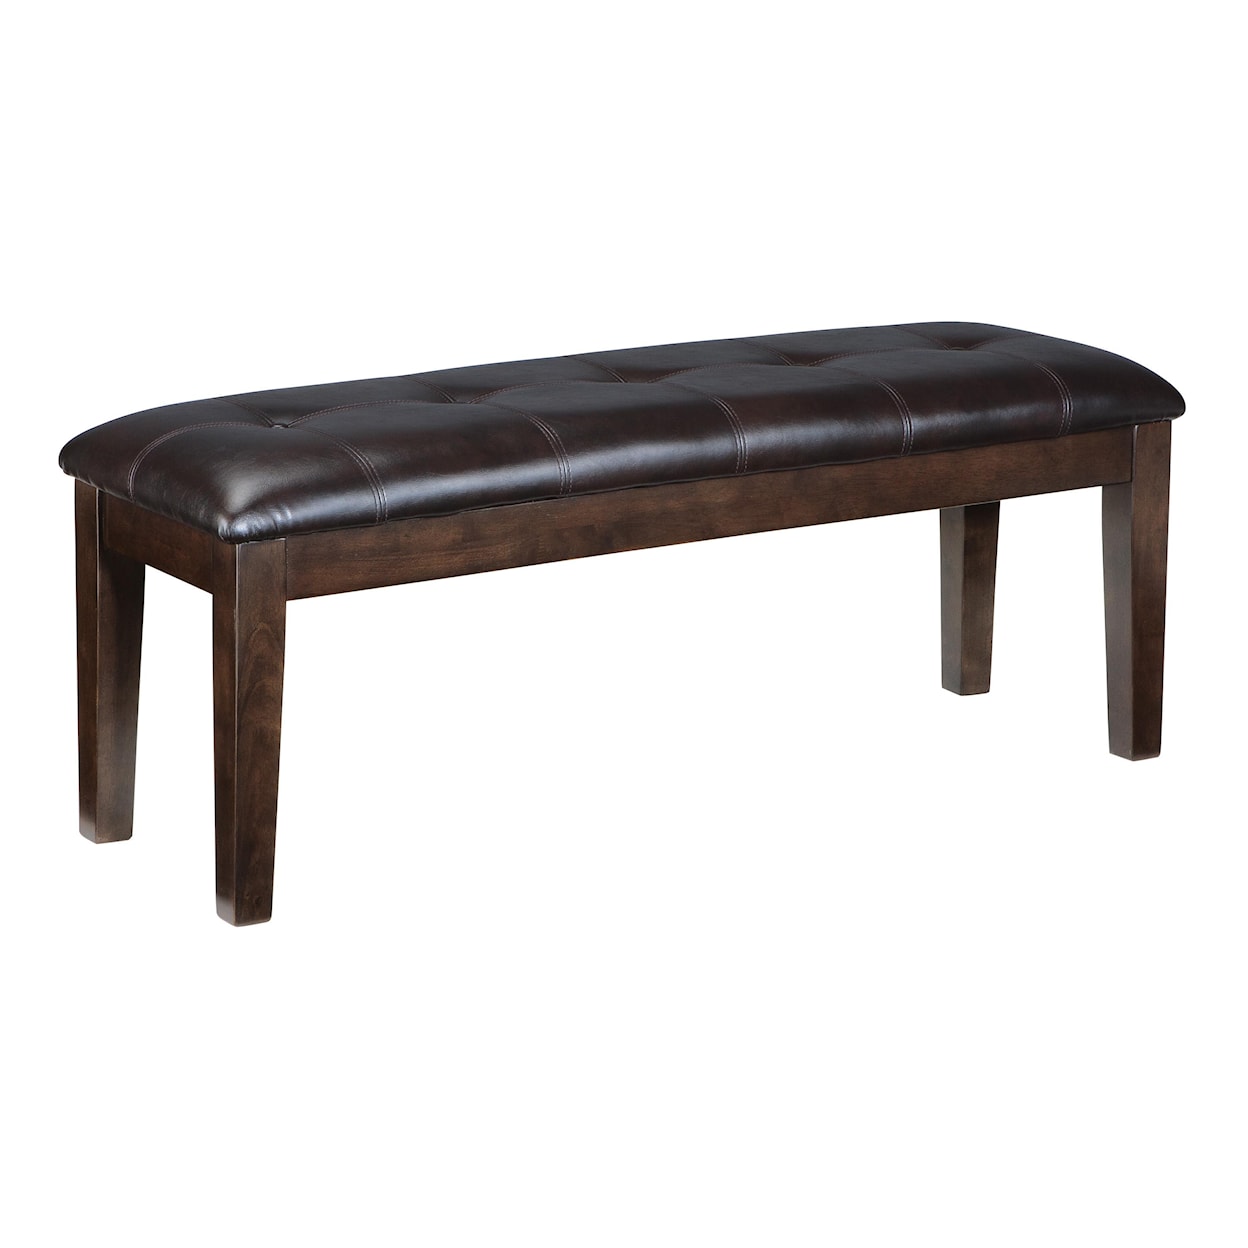 Signature Design by Ashley Haddigan Upholstered Dining Room Bench